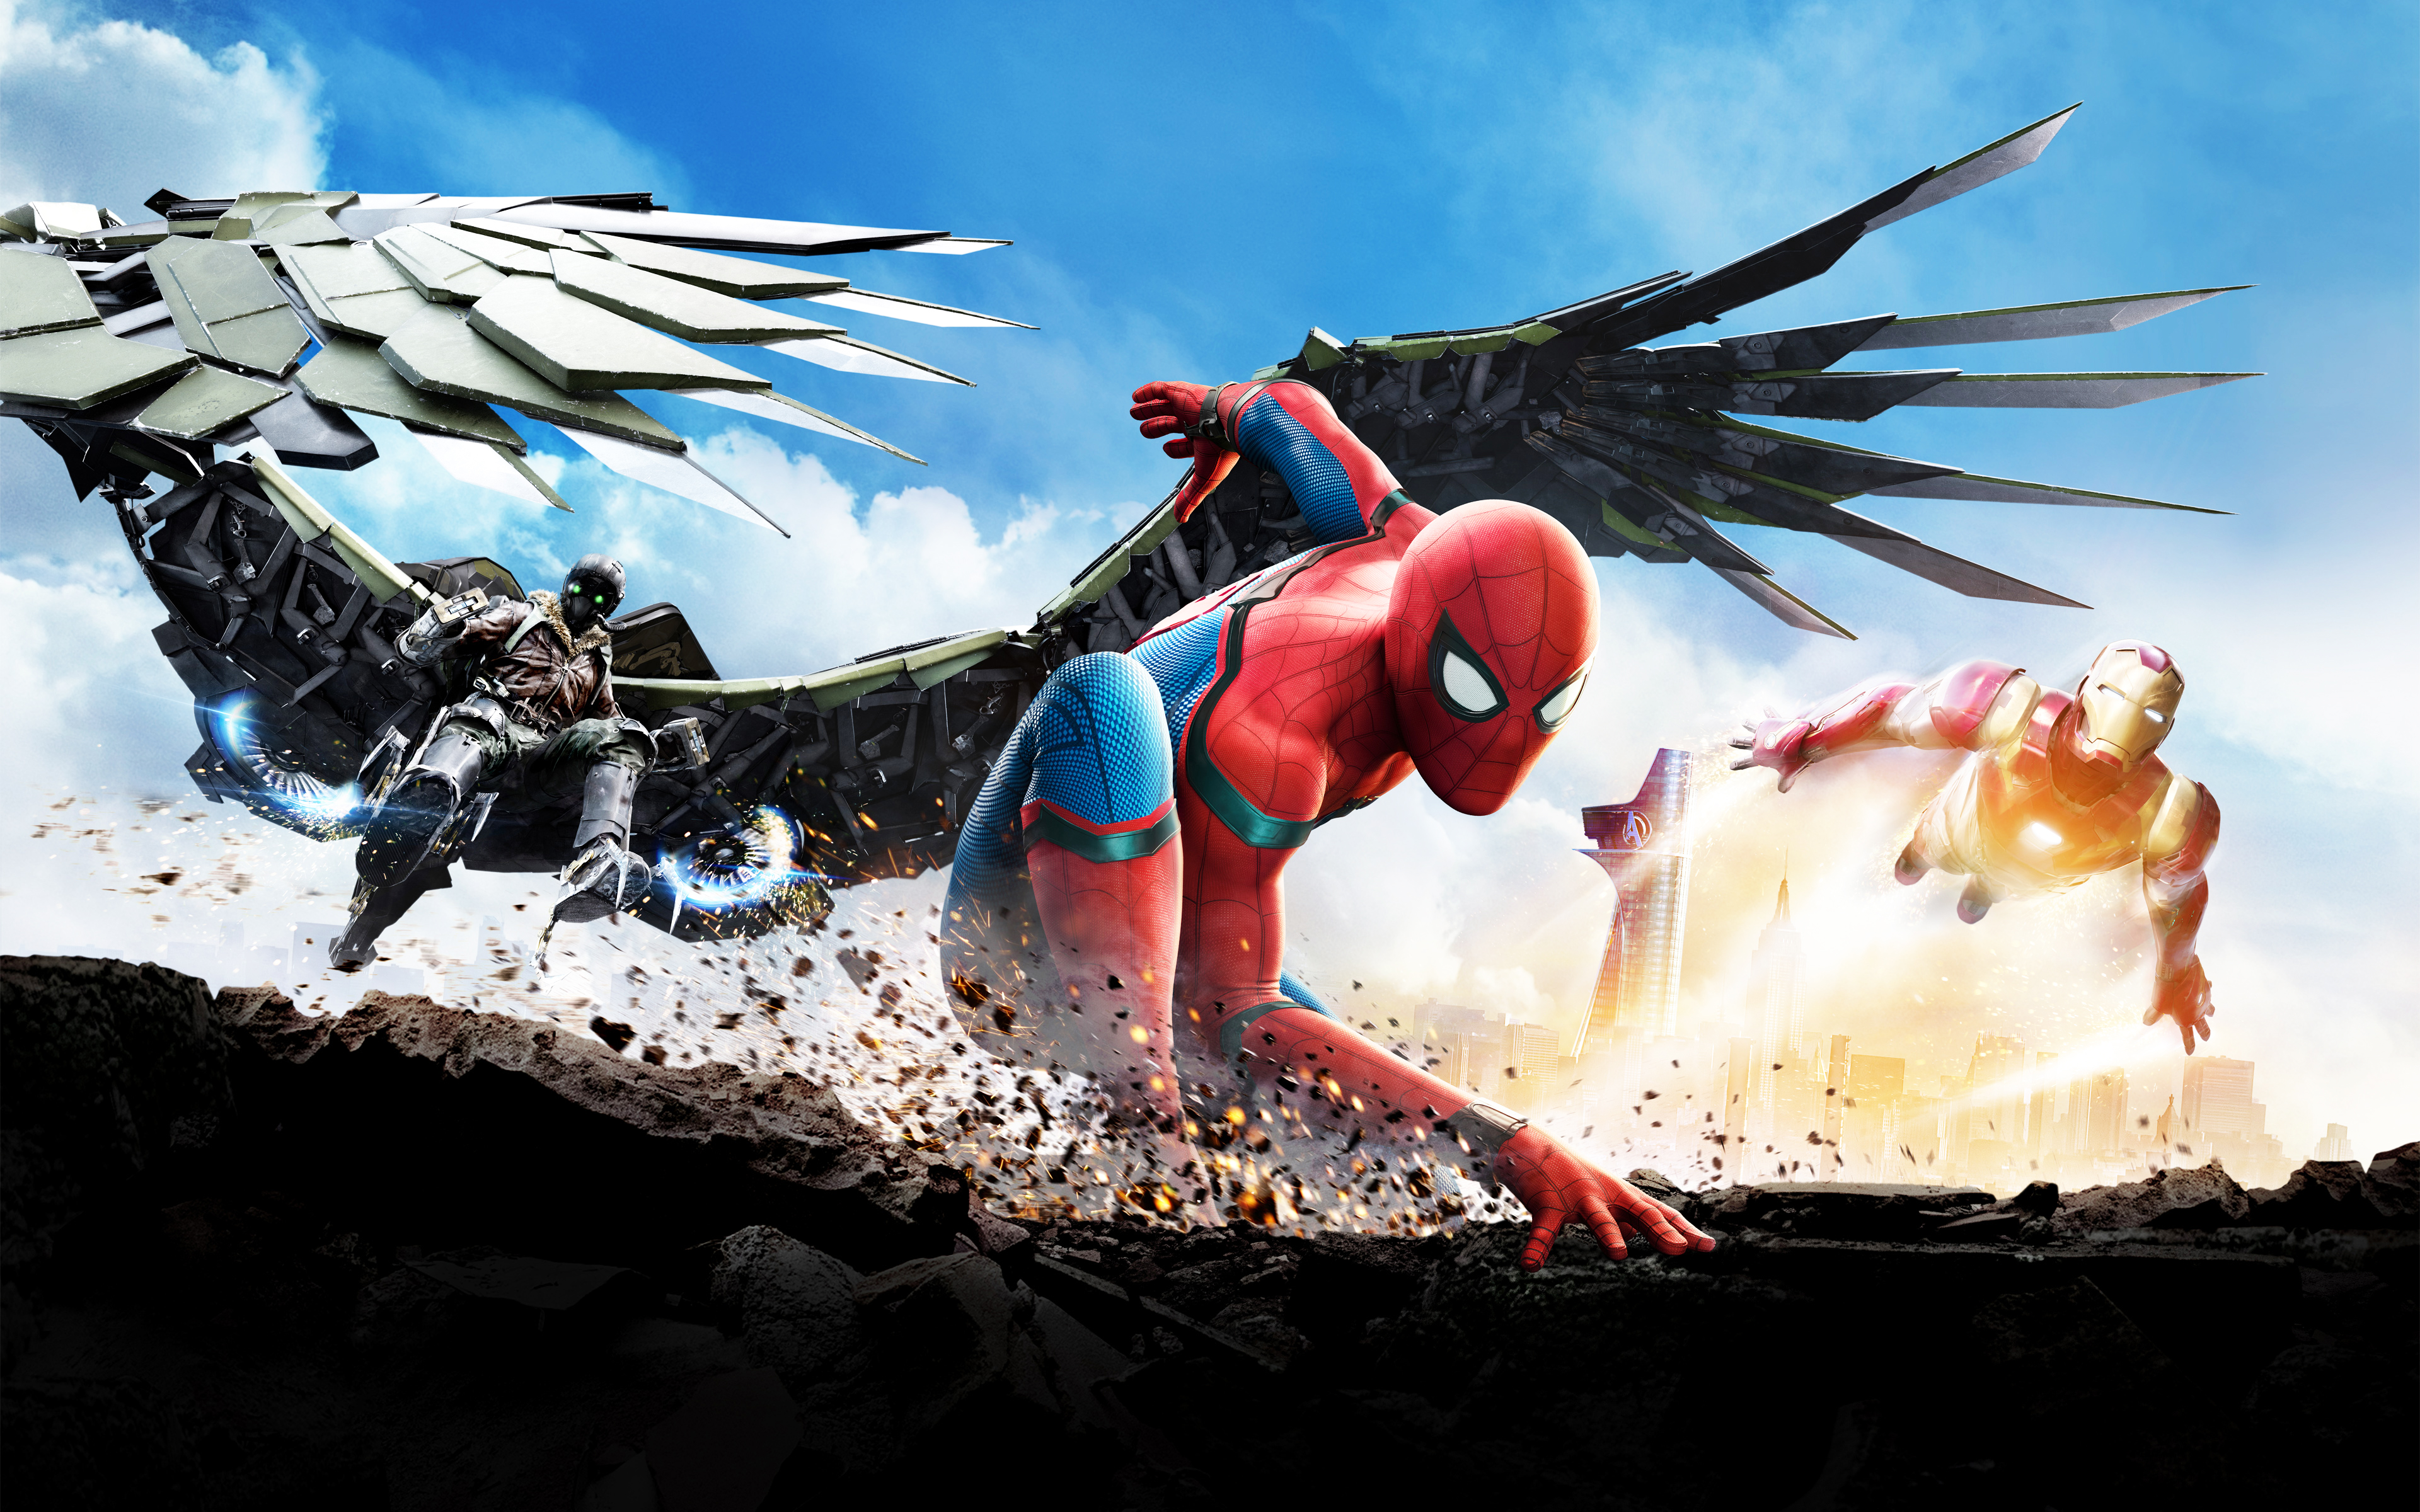 Spider-Man: Homecoming for android download